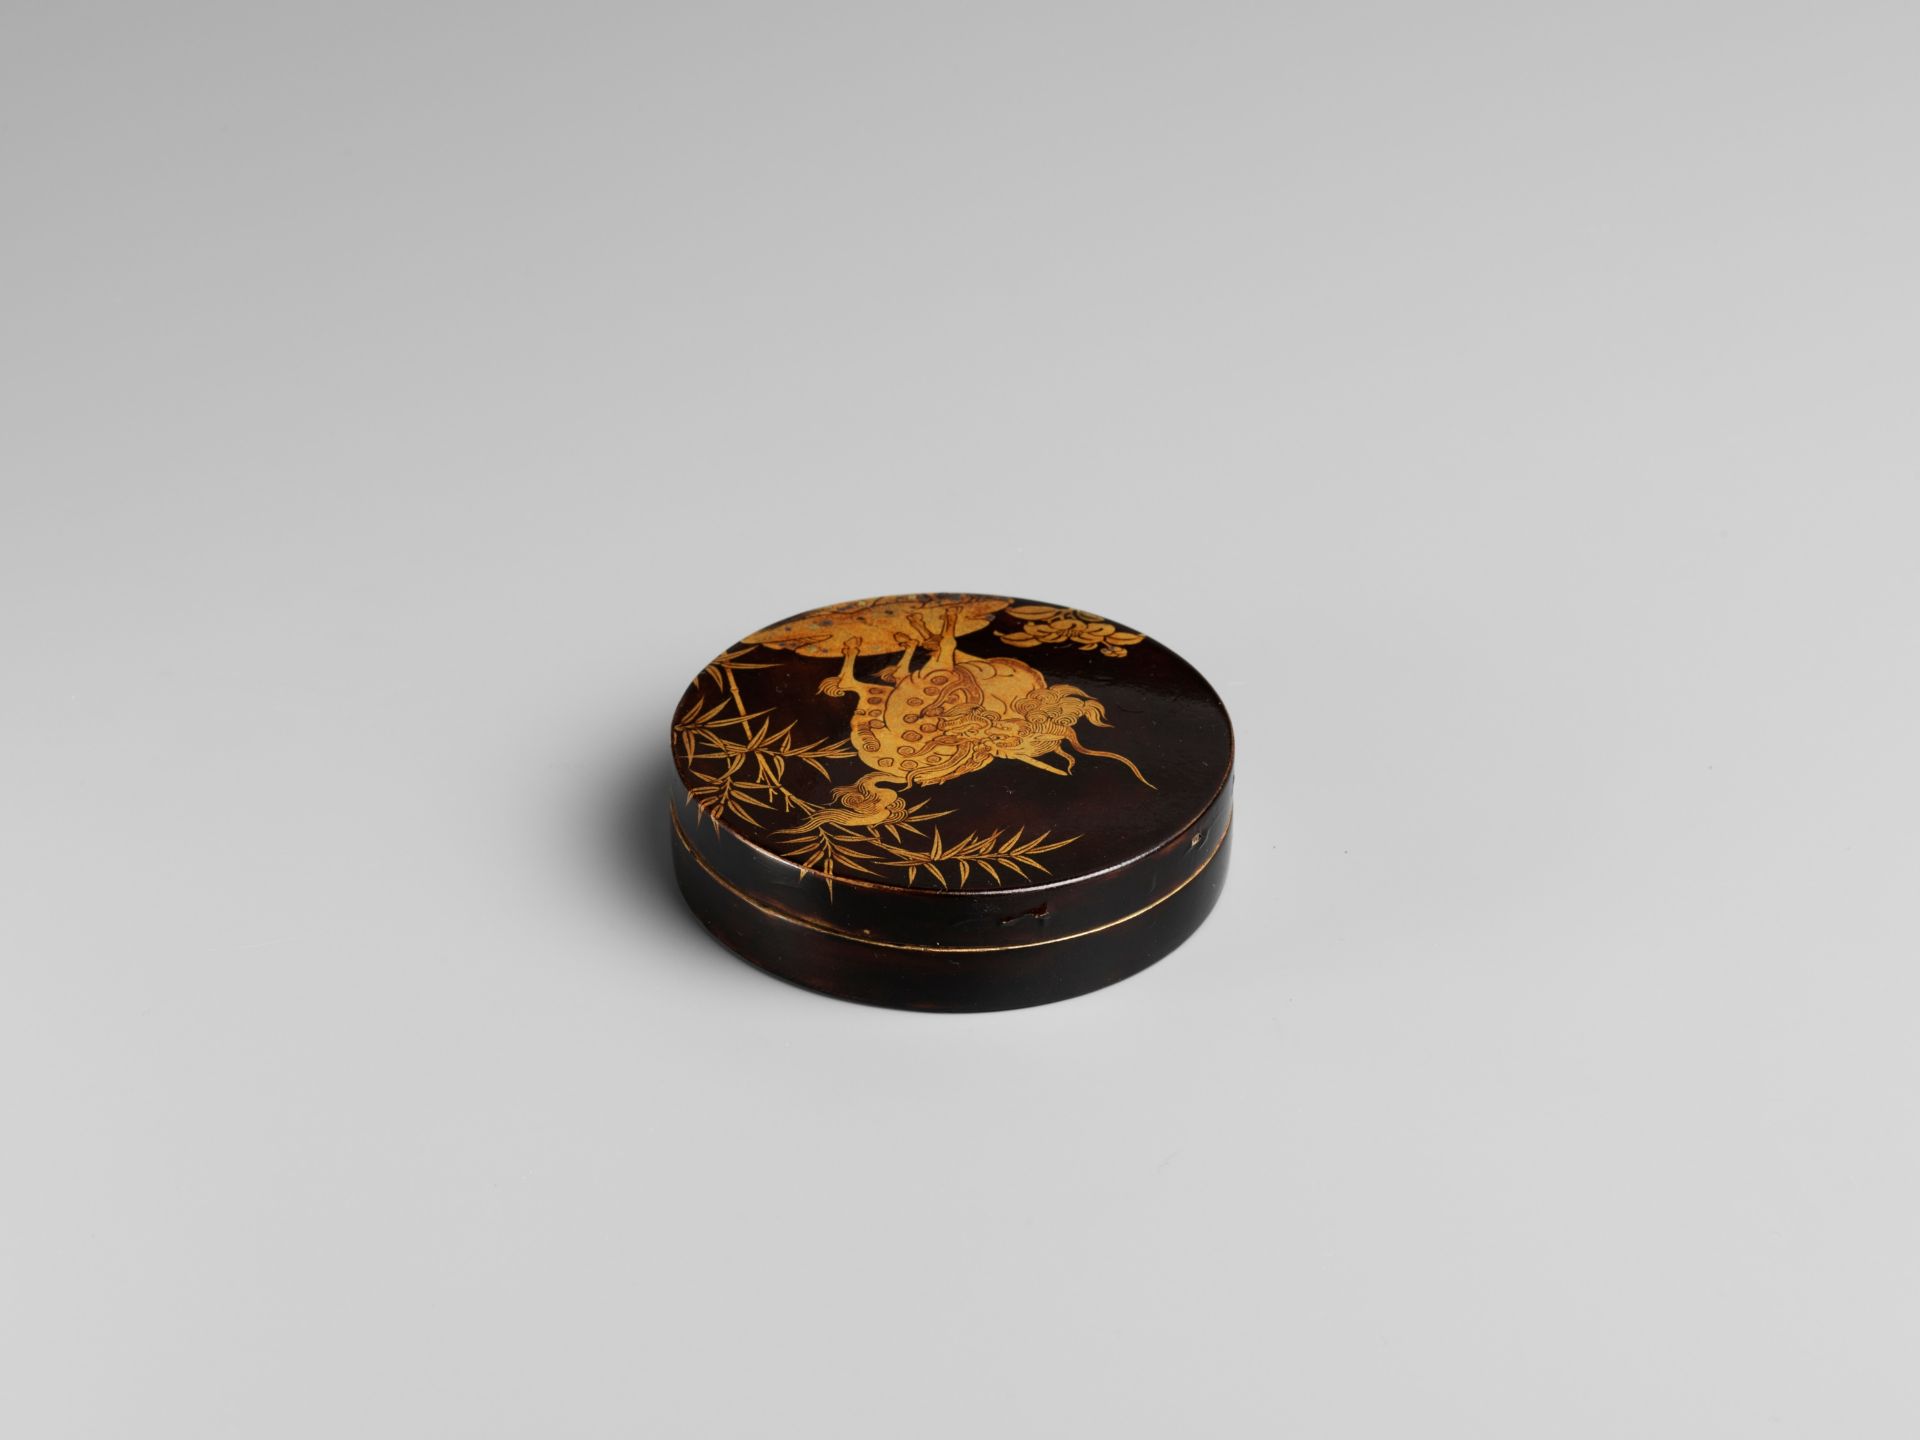 A RARE CIRCULAR LACQUER KOGO (INCENSE CONTAINER) WITH KIRIN - Image 6 of 7